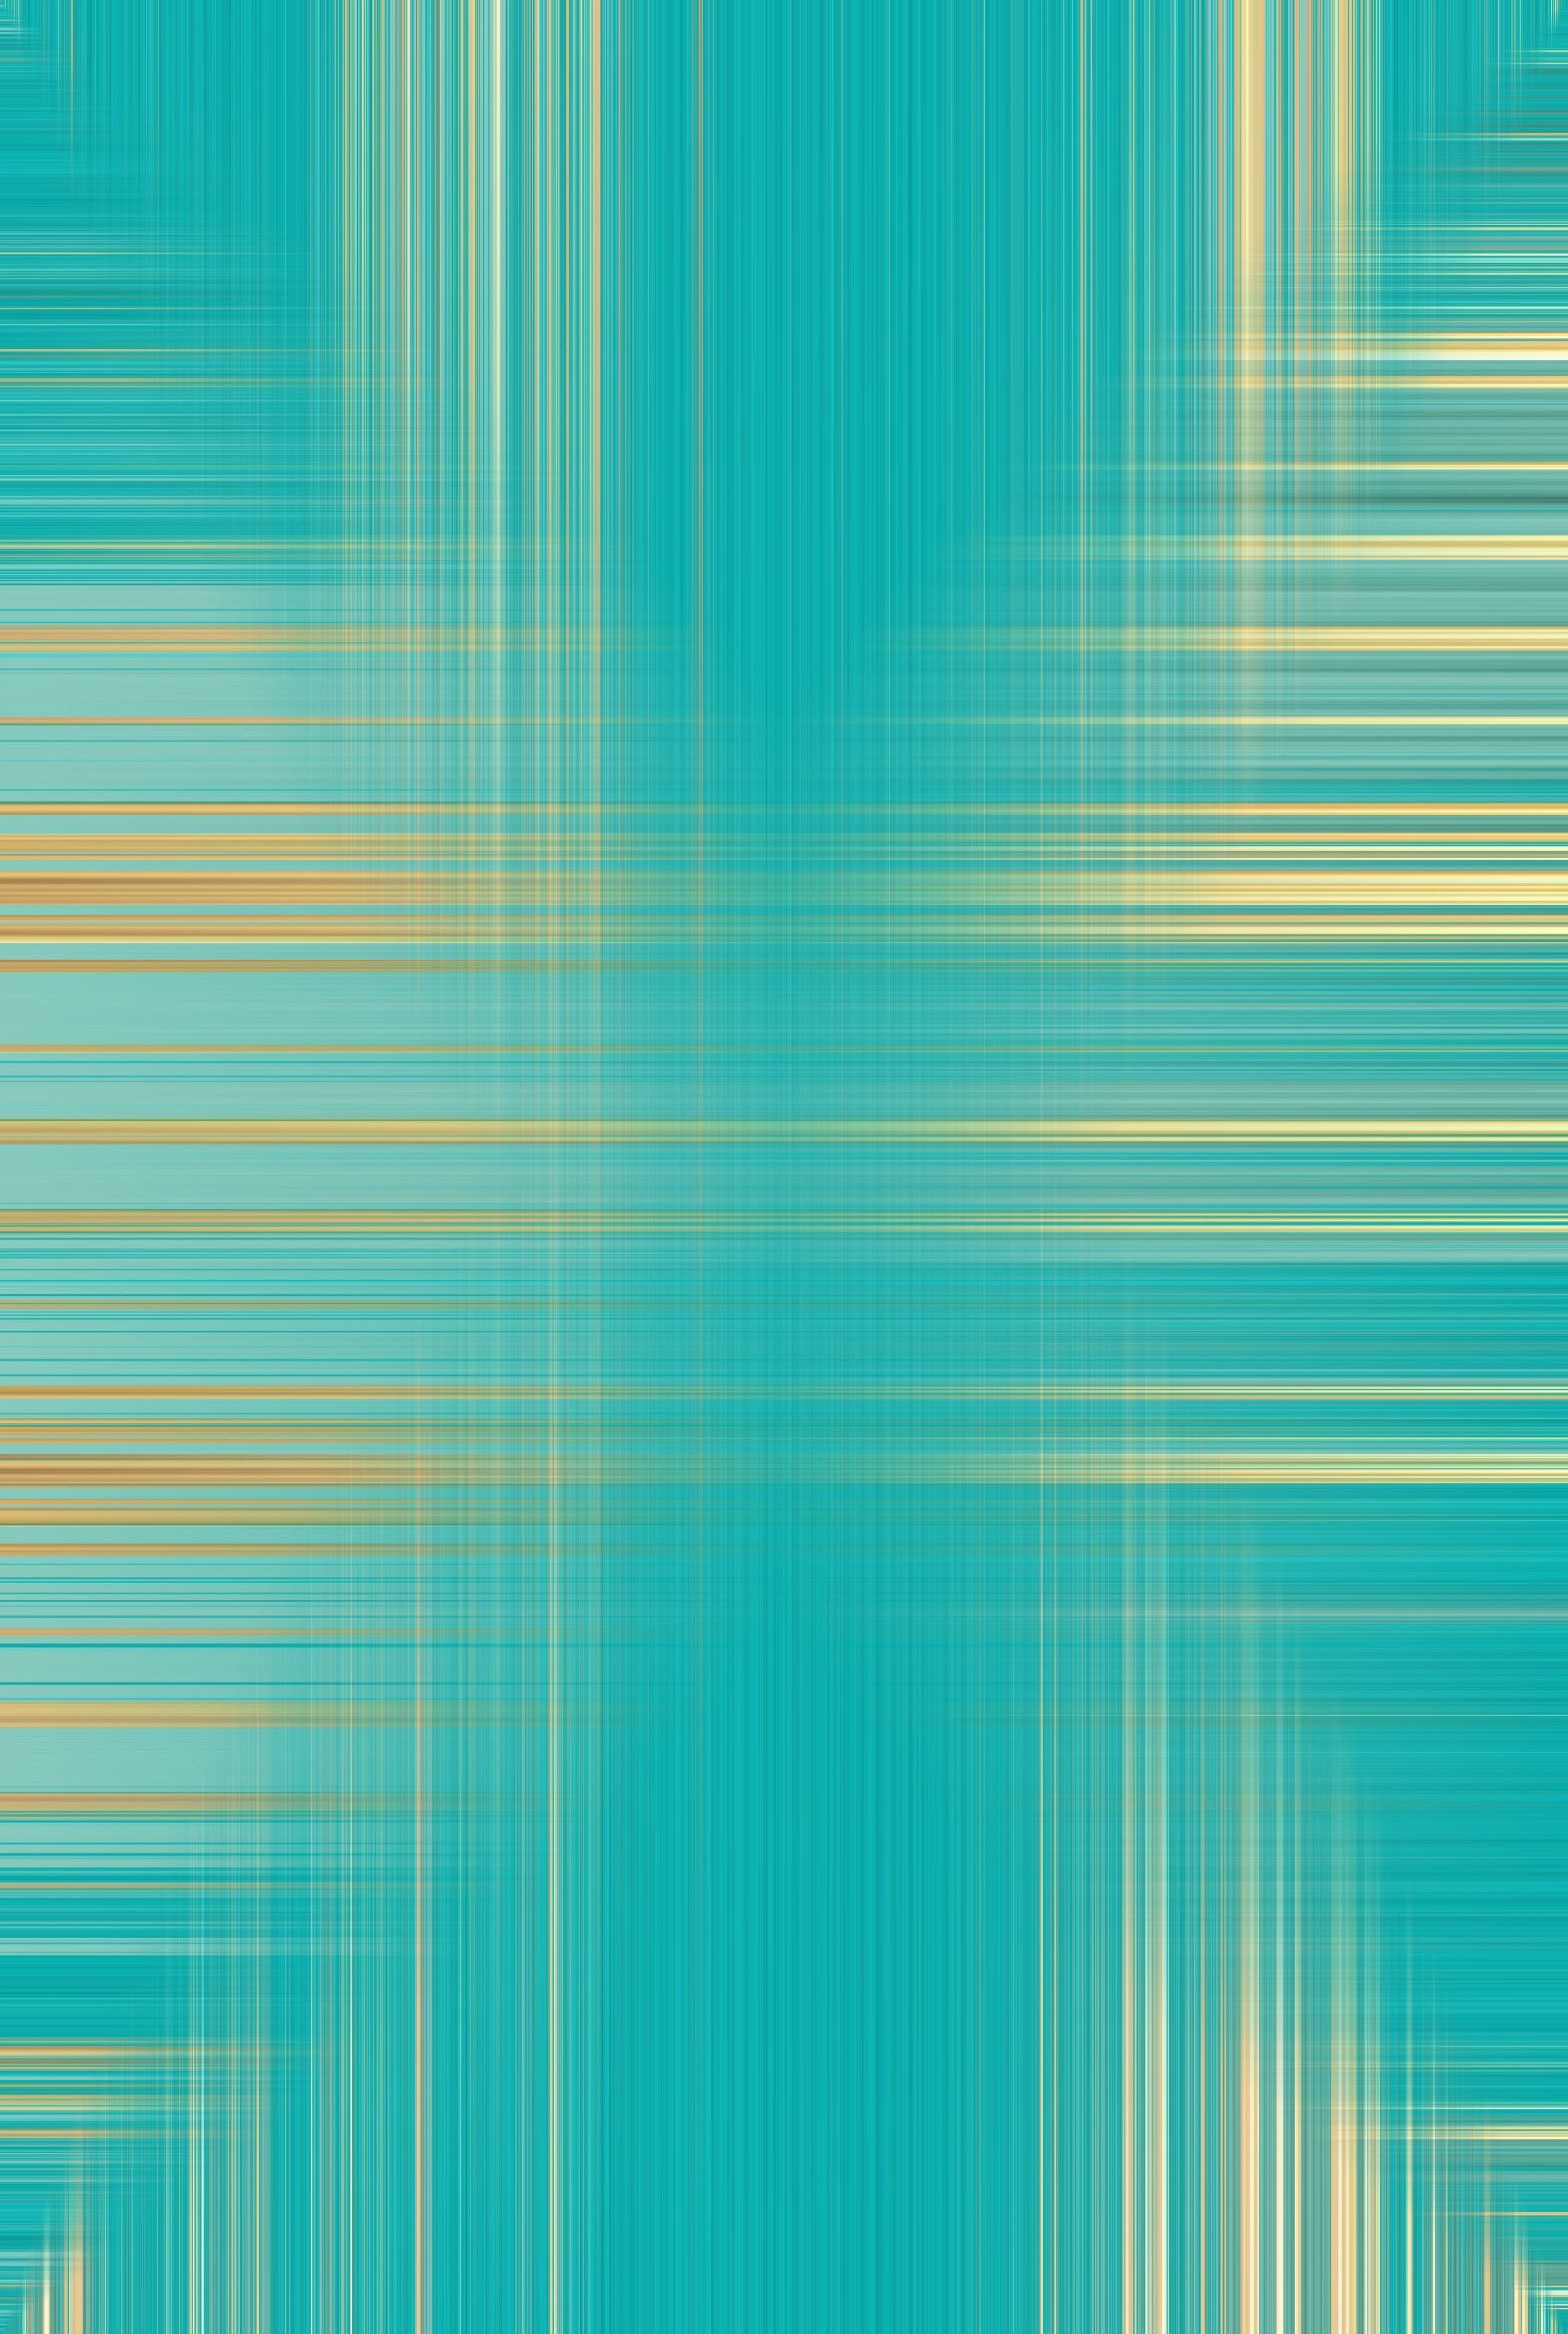 lines, graphics, textures, texture, stripes, turquoise, streaks Full HD